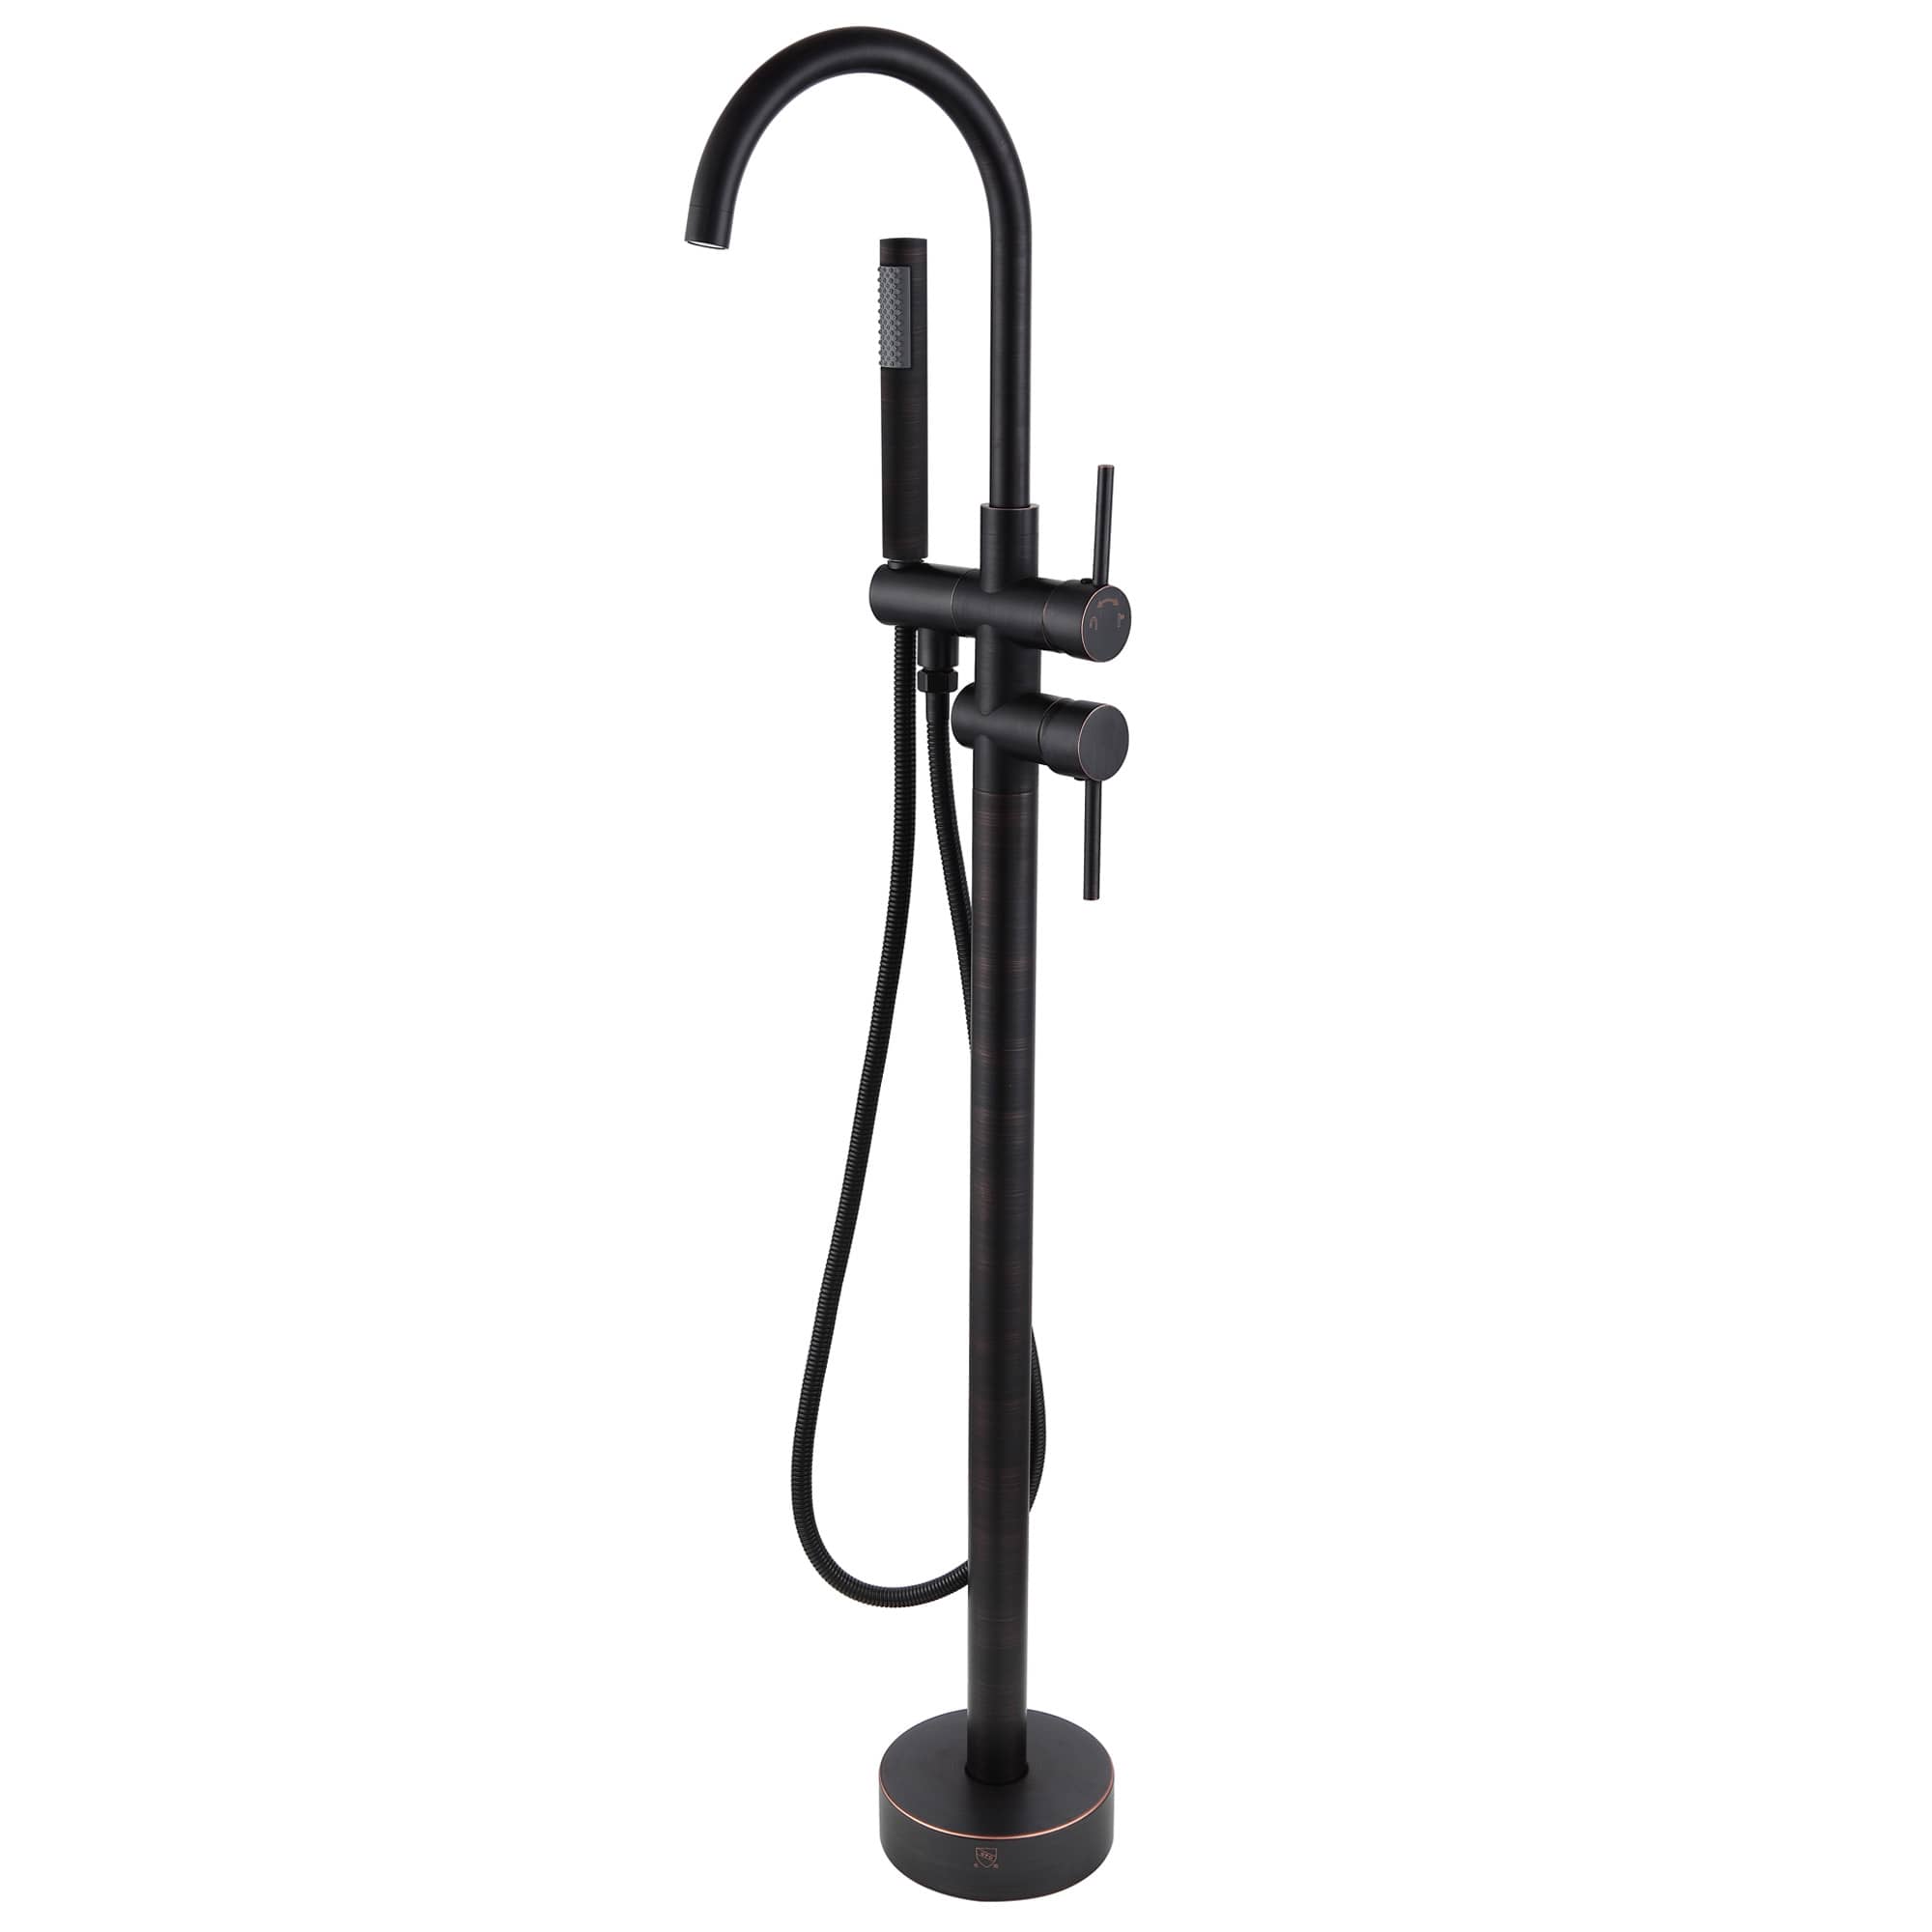 Casainc 2-Handle Commercial Freestanding Bathtub Faucet with Hand Shower in Matte Black and More